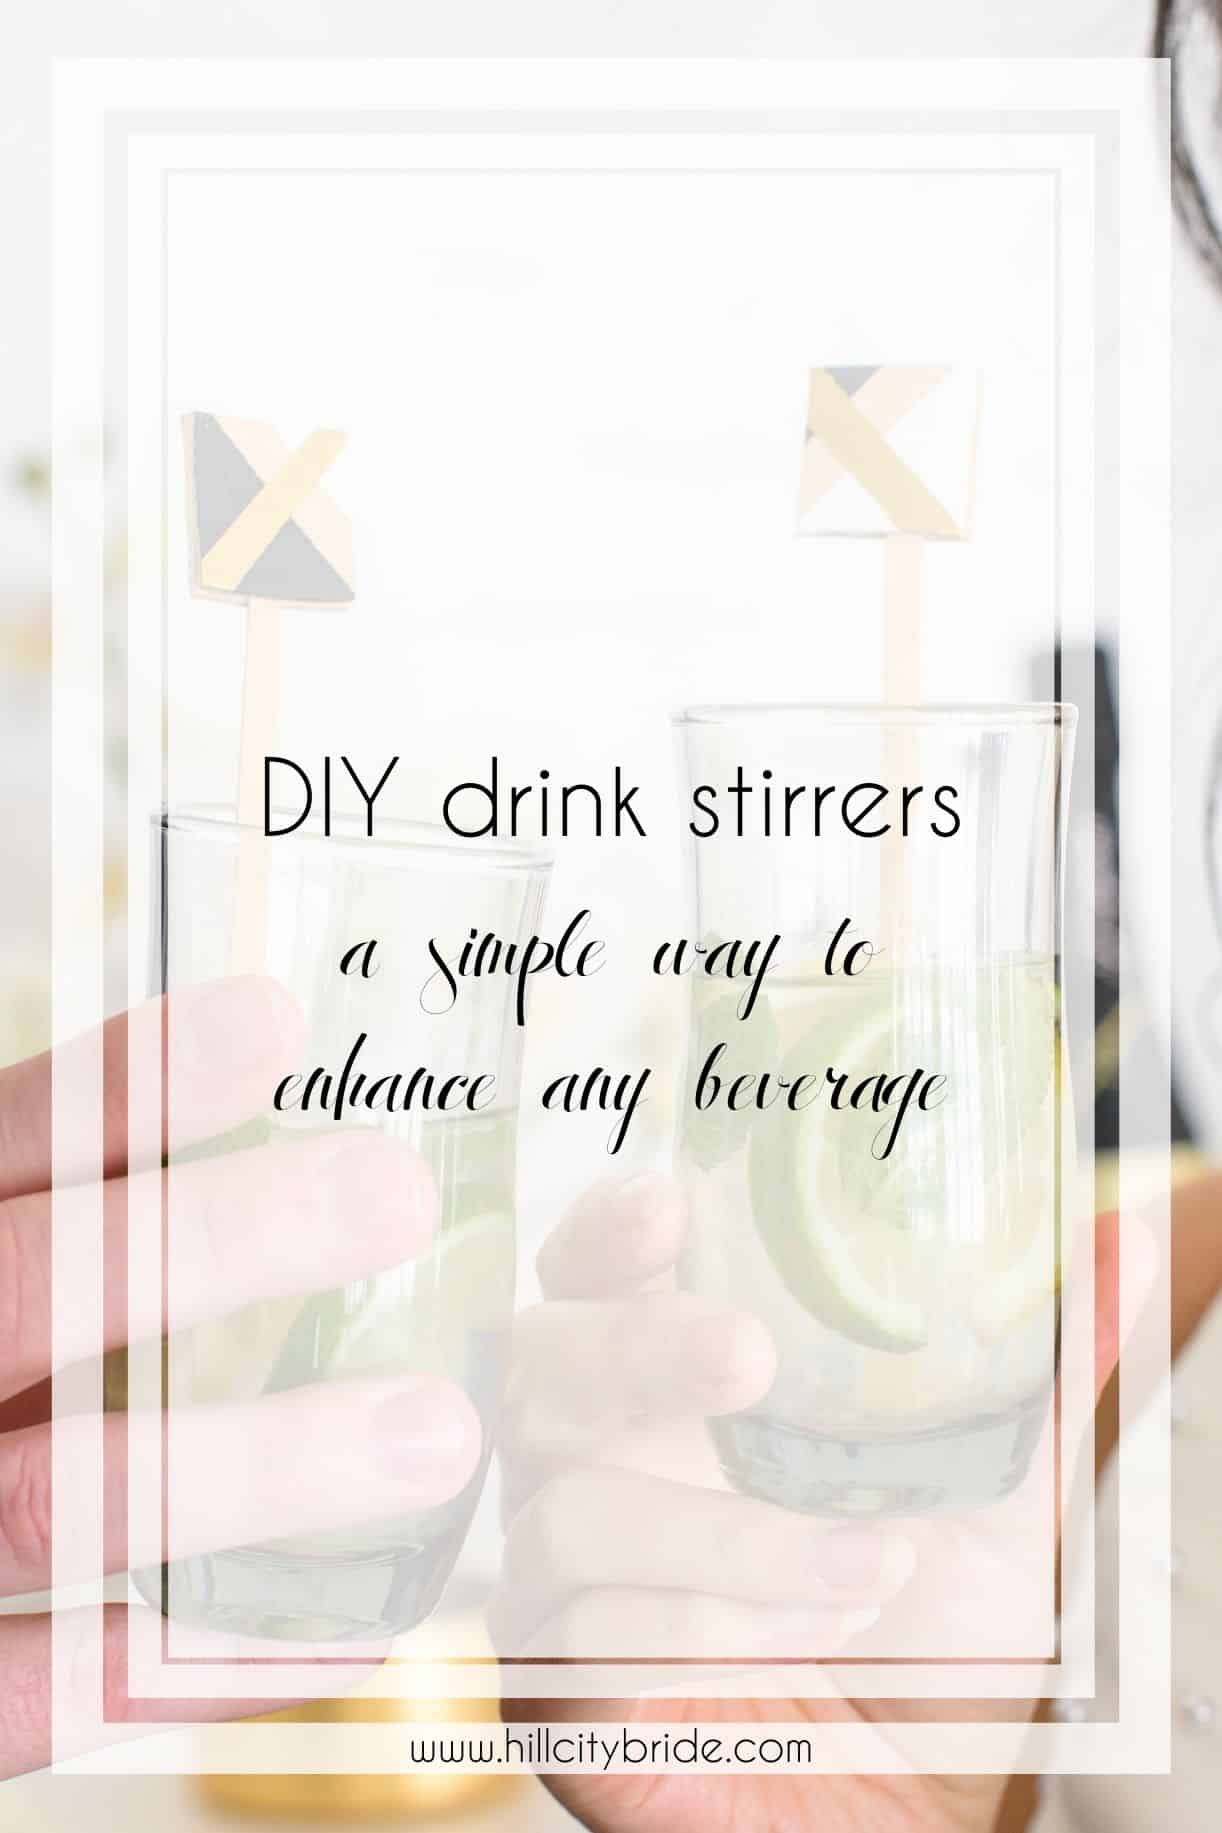 Make These Adorable DIY Drink Stirrers for a Themed Big Day